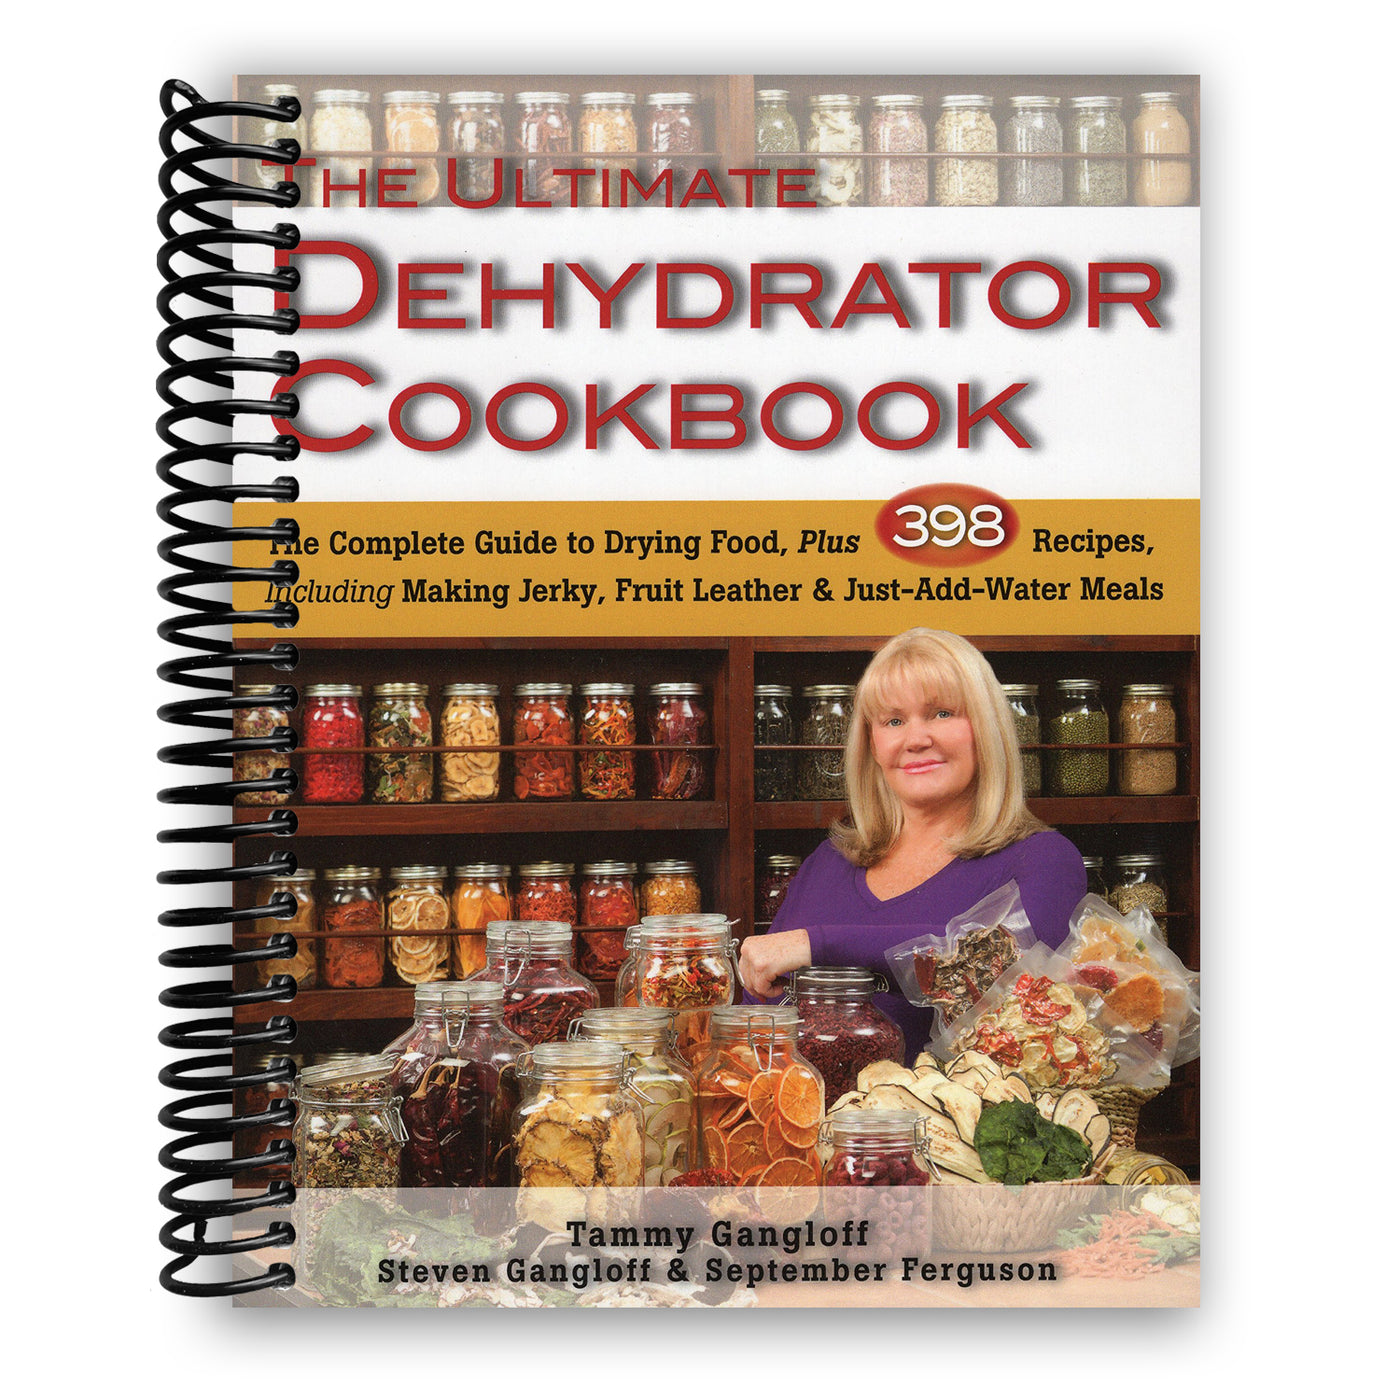 The Ultimate Dehydrator Cookbook: The Complete Guide to Drying Food Including Making Jerky & Just-Add-Water Meals (Spiral Bound)